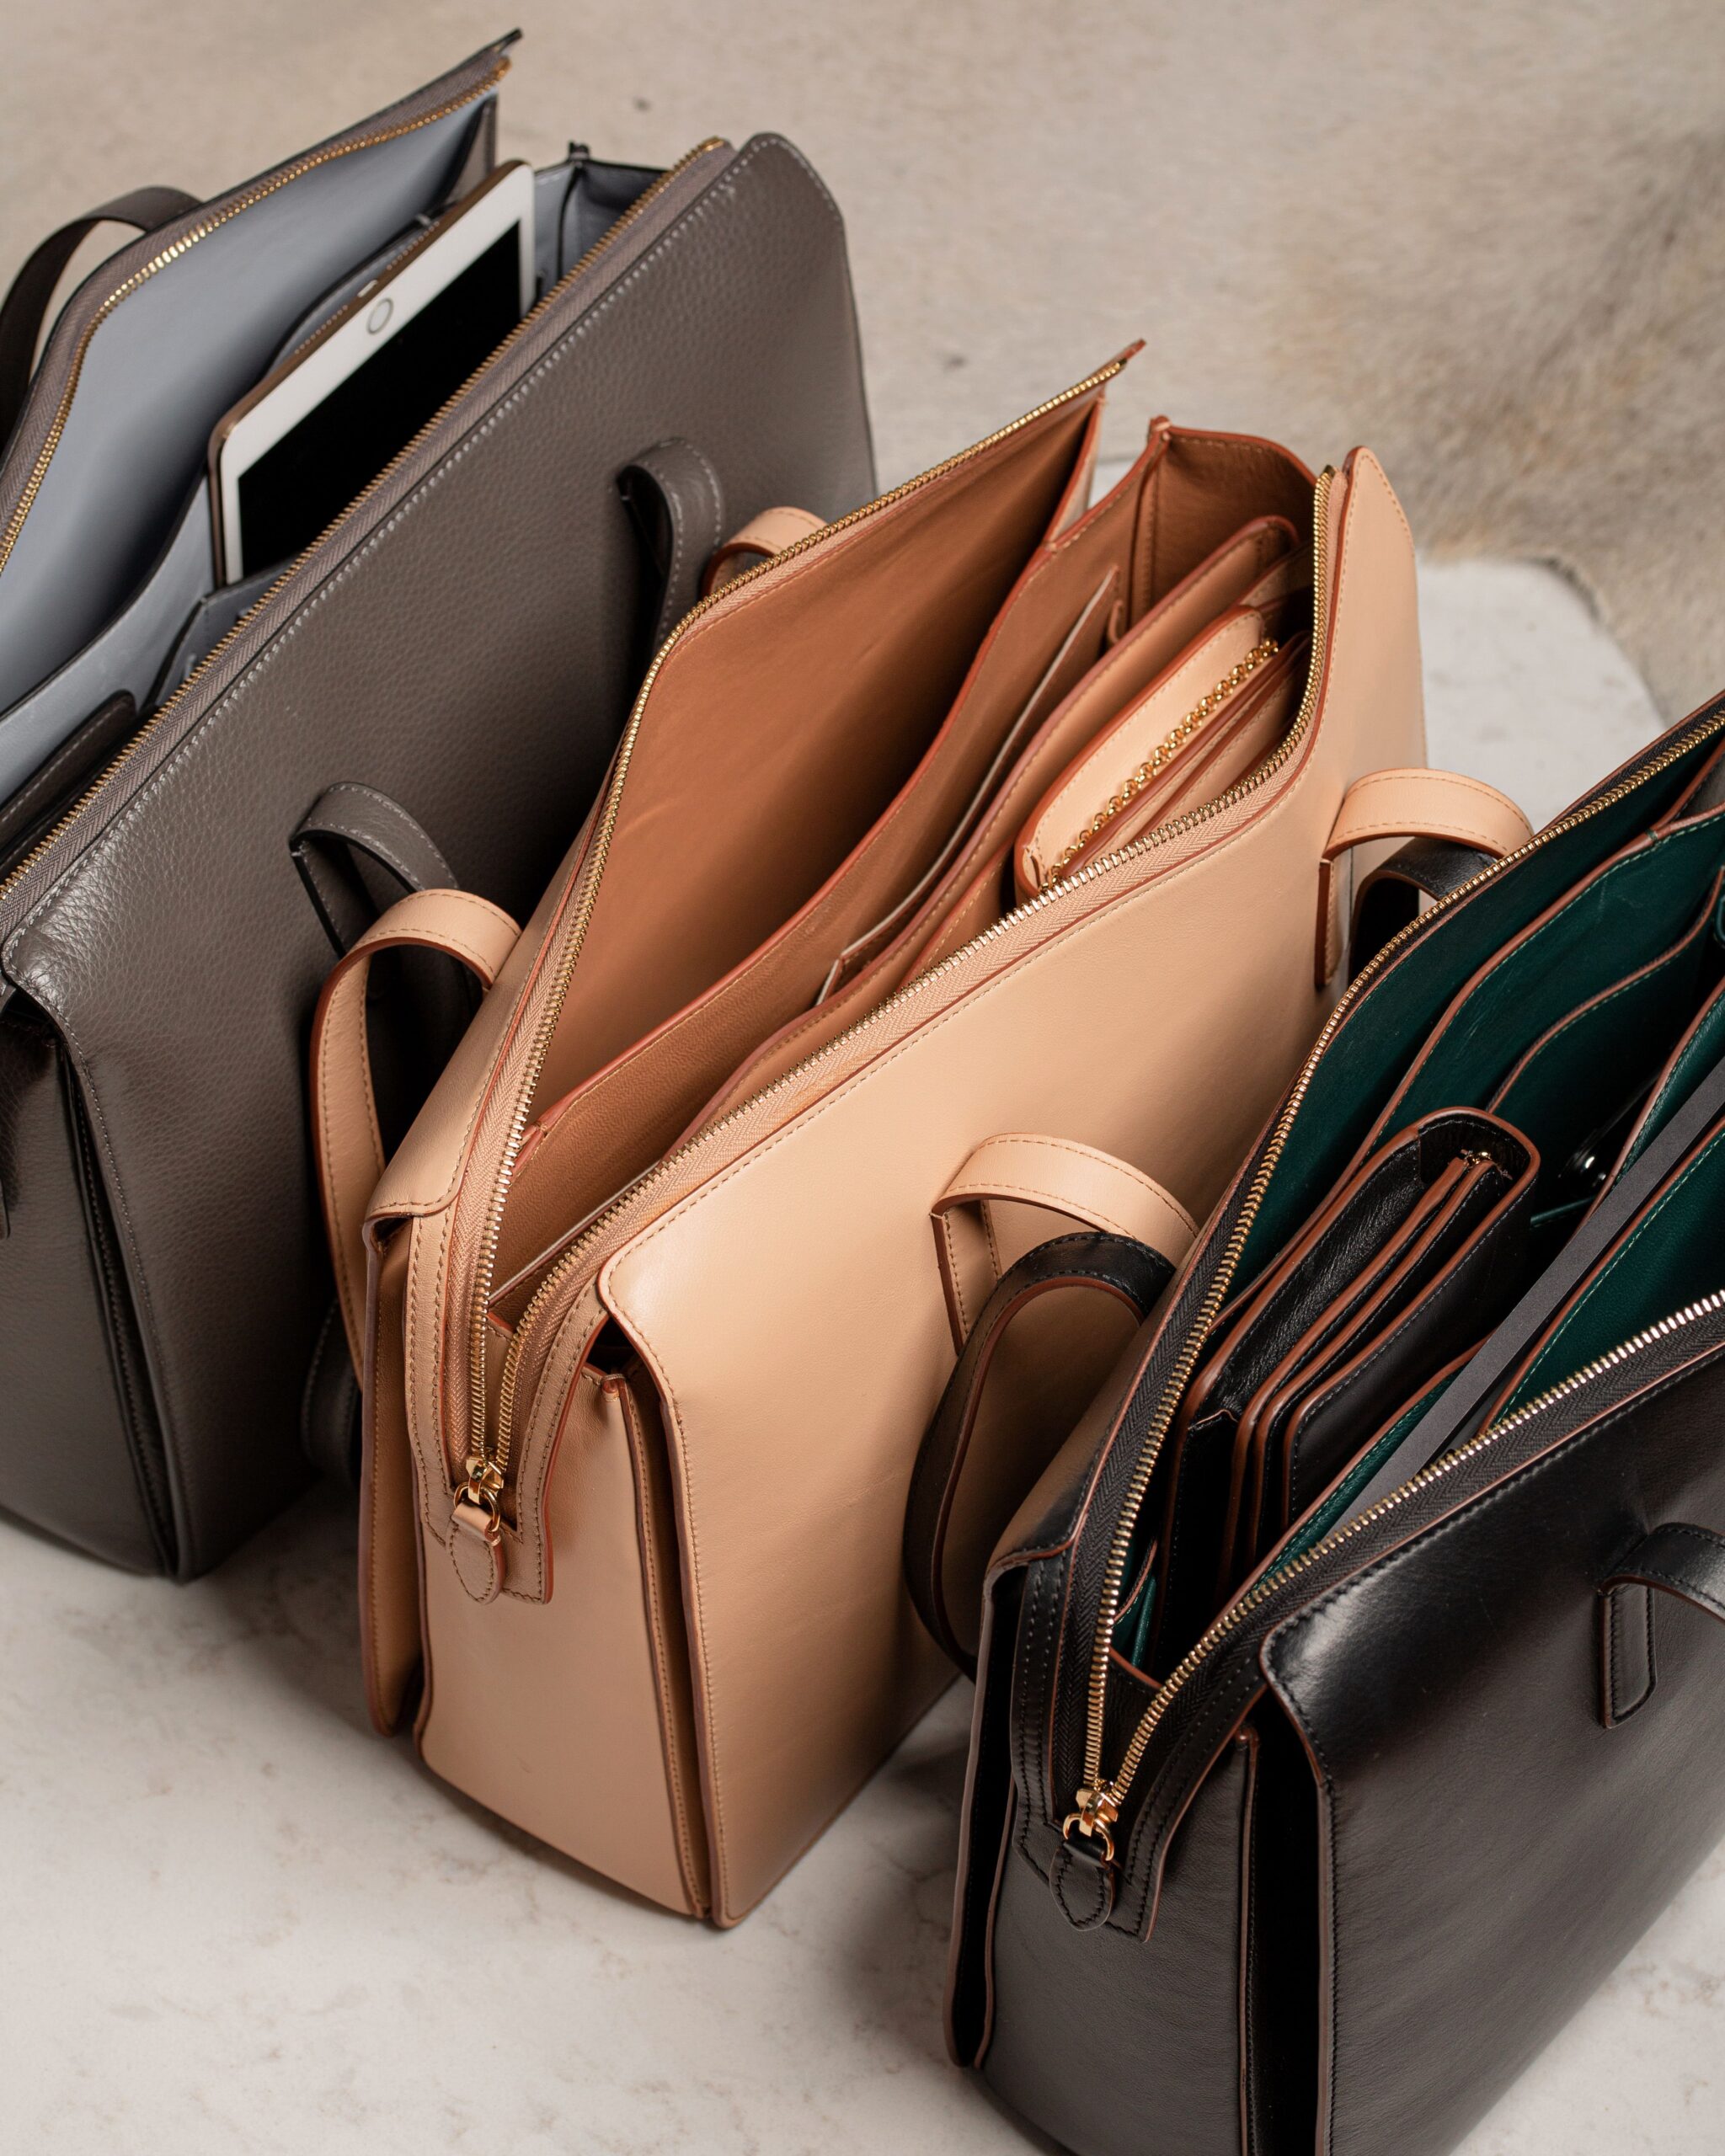 Workday Essentials: Stylish Laptop Bags for On-the-Go Professionals